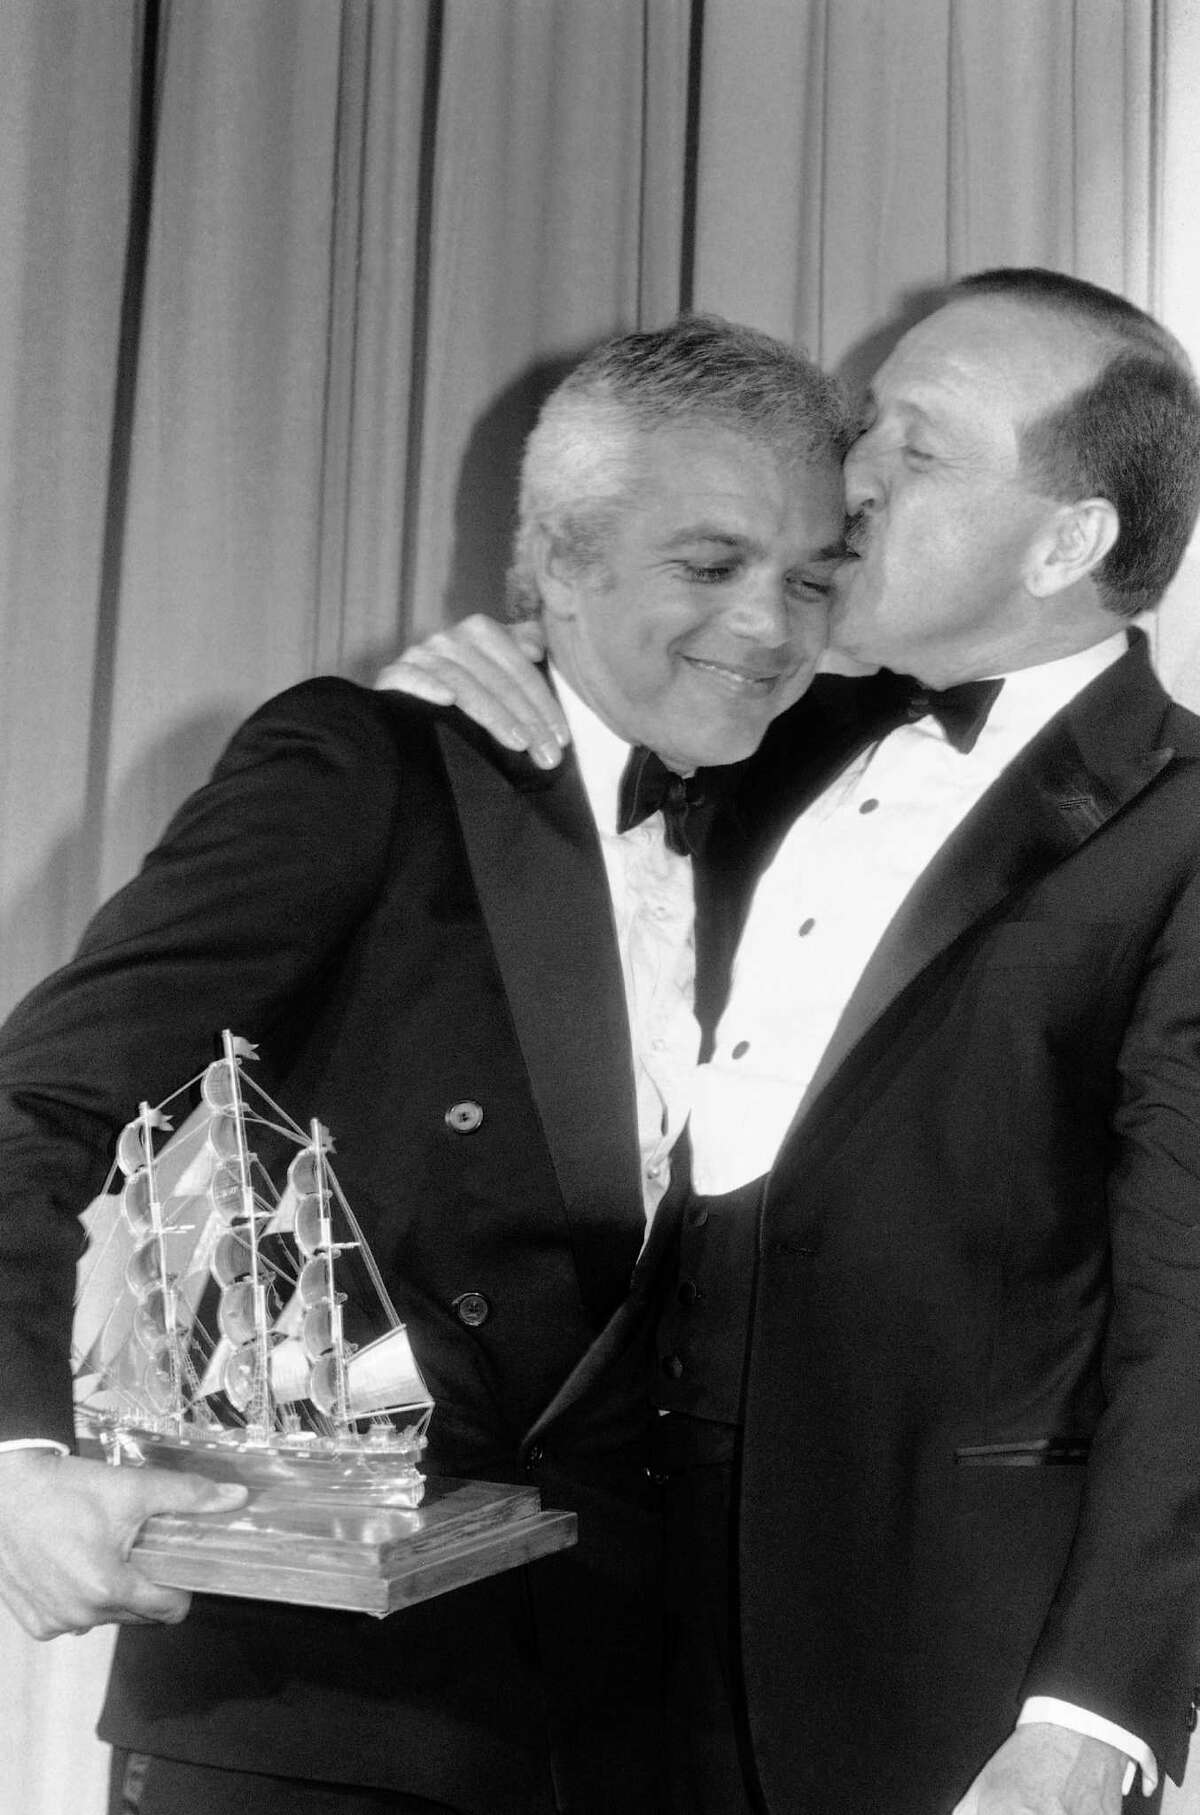 Designer Ralph Lauren gets a kiss from Career Achievement Award presenter Wilkes Bashford during Cutty Sark Fashion Awards ceremonies in Philadelphia, June 21, 1983. Lauren received the award for "continuing leadership and outstanding contributions to men’s fashions." Bashford was last year's recipient of a Cutty Sark award for creative retailing. The winners are selected by a panel of U.S. fashion writers. (AP Photo/George Widman)